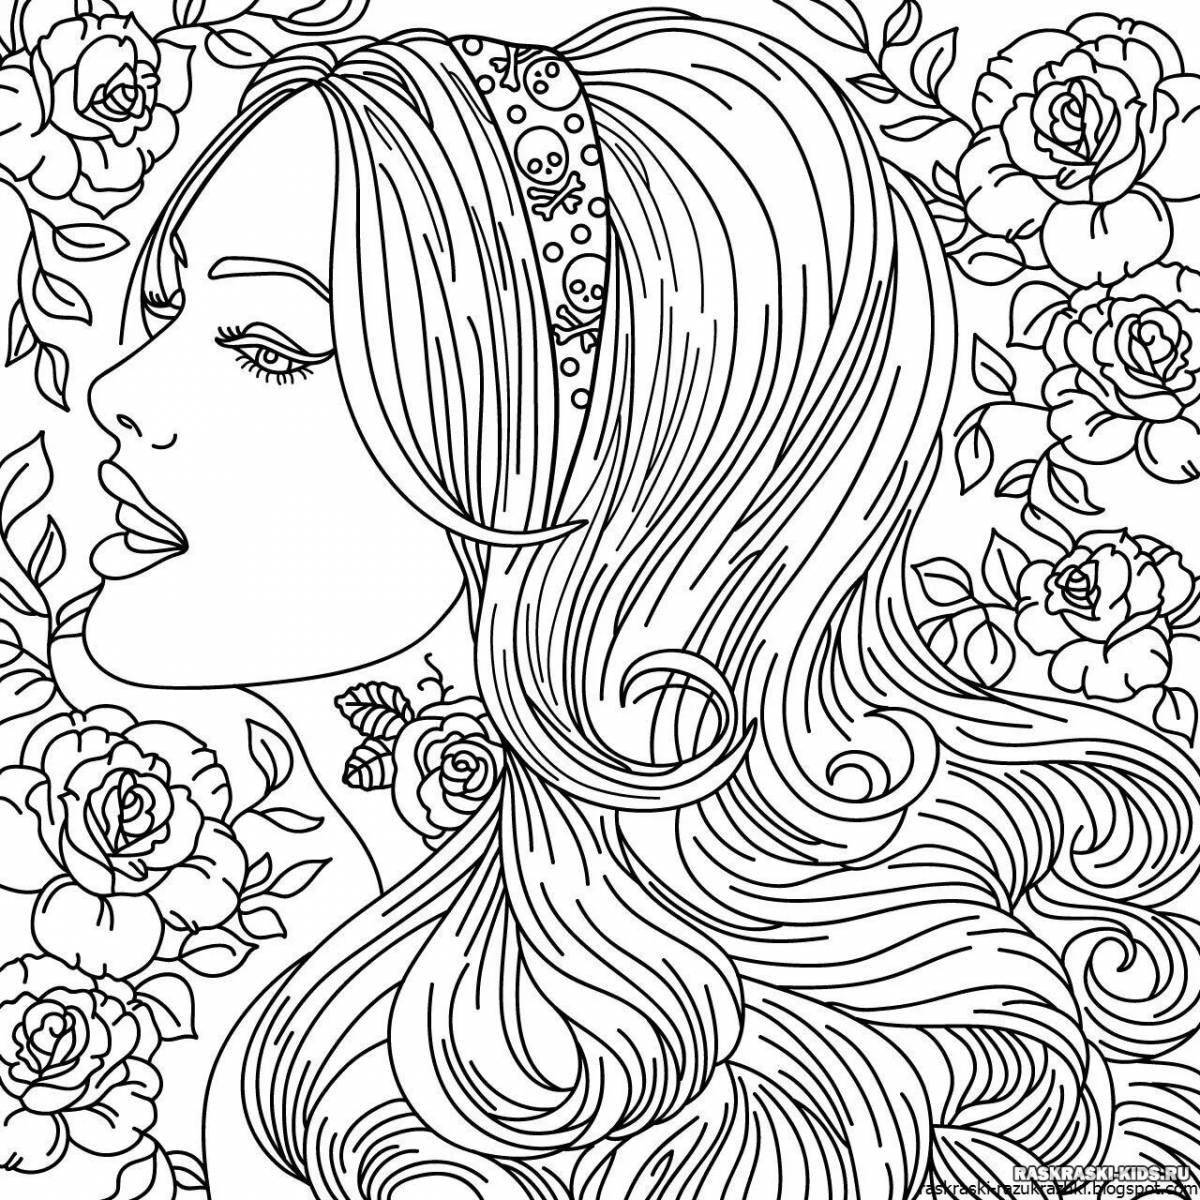 Exquisite coloring book for 14 year old girls